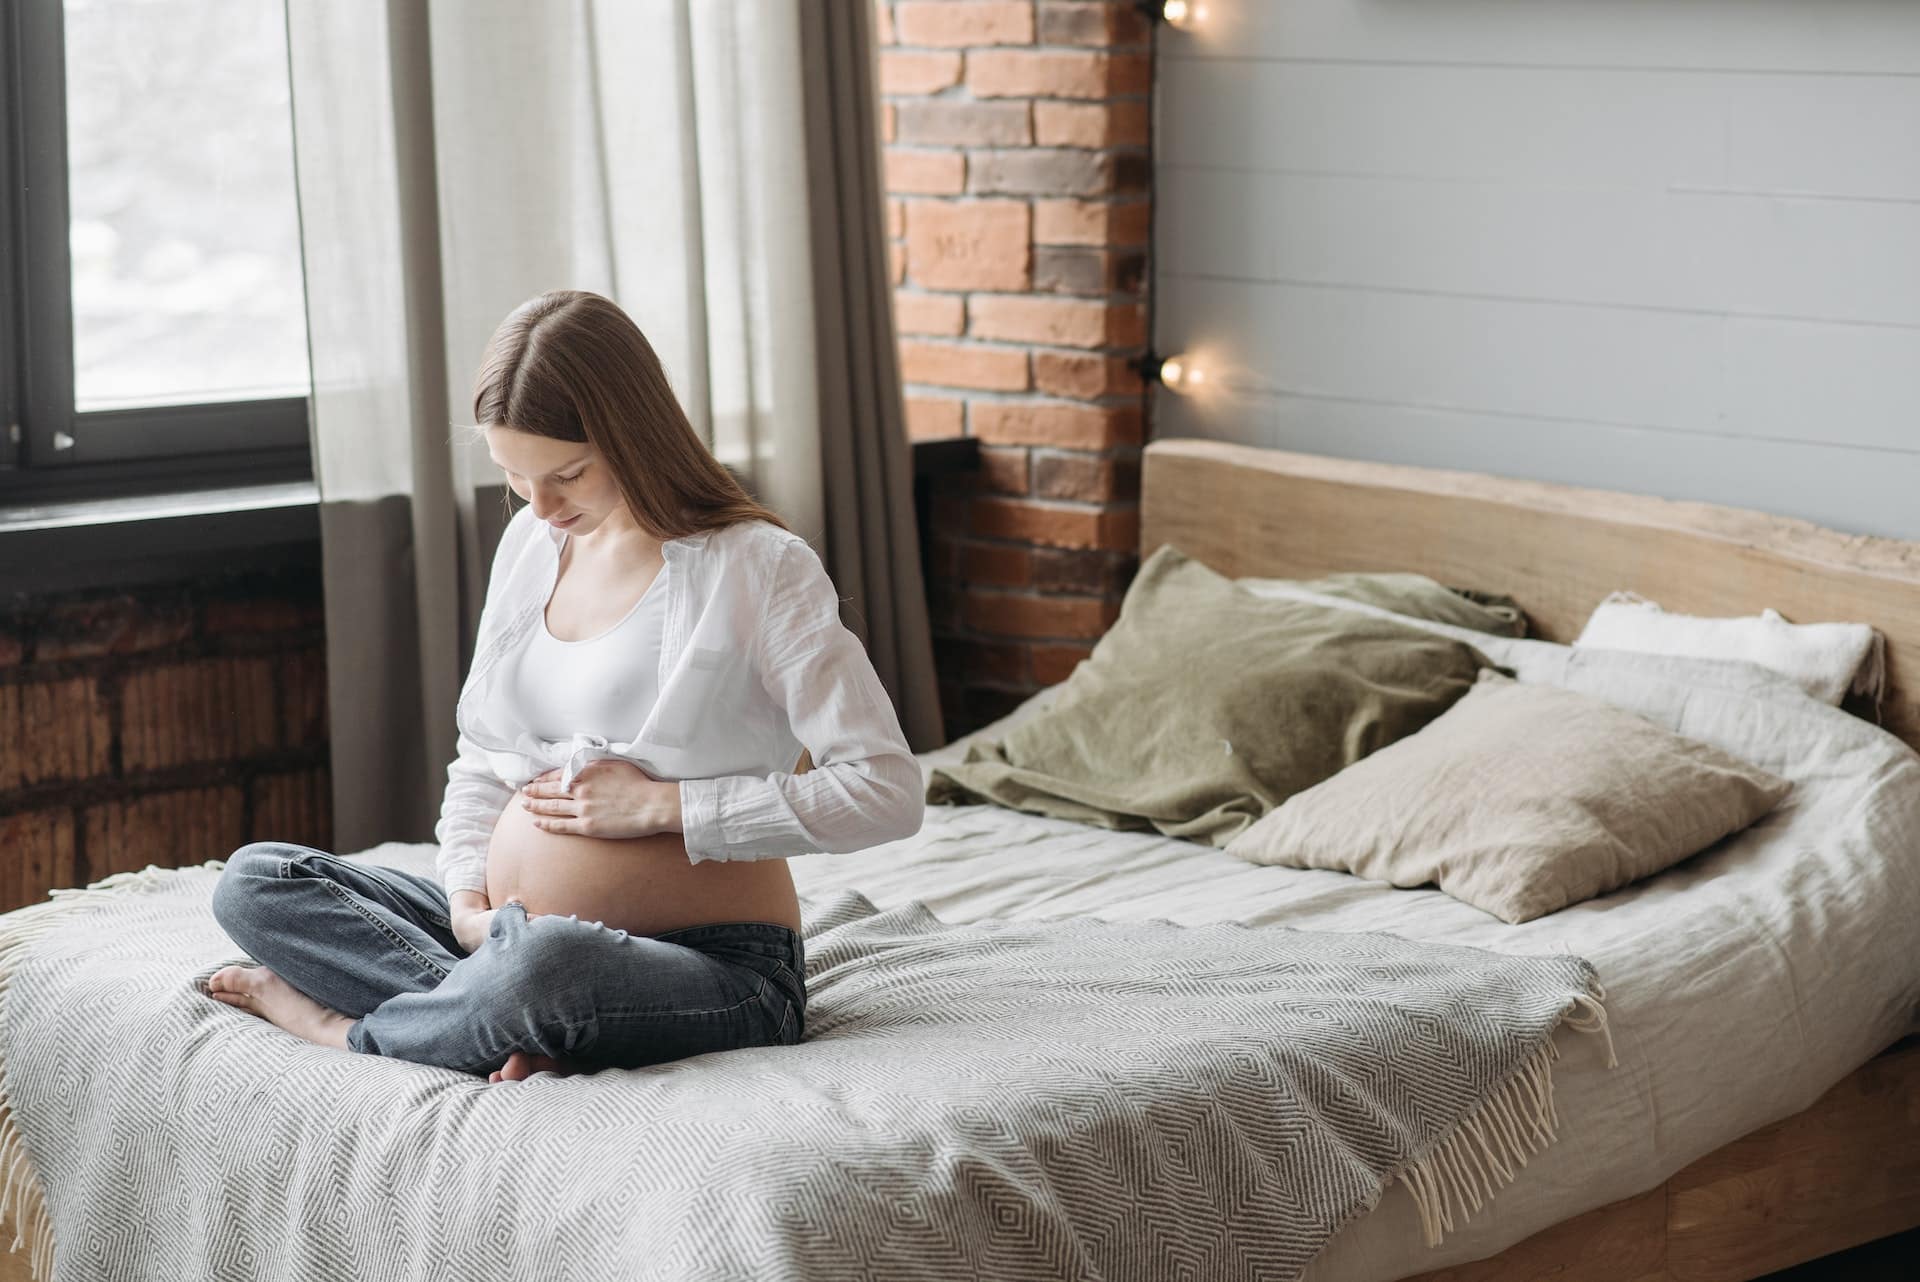 Answers to your most Commonly Googled Pregnancy Questions